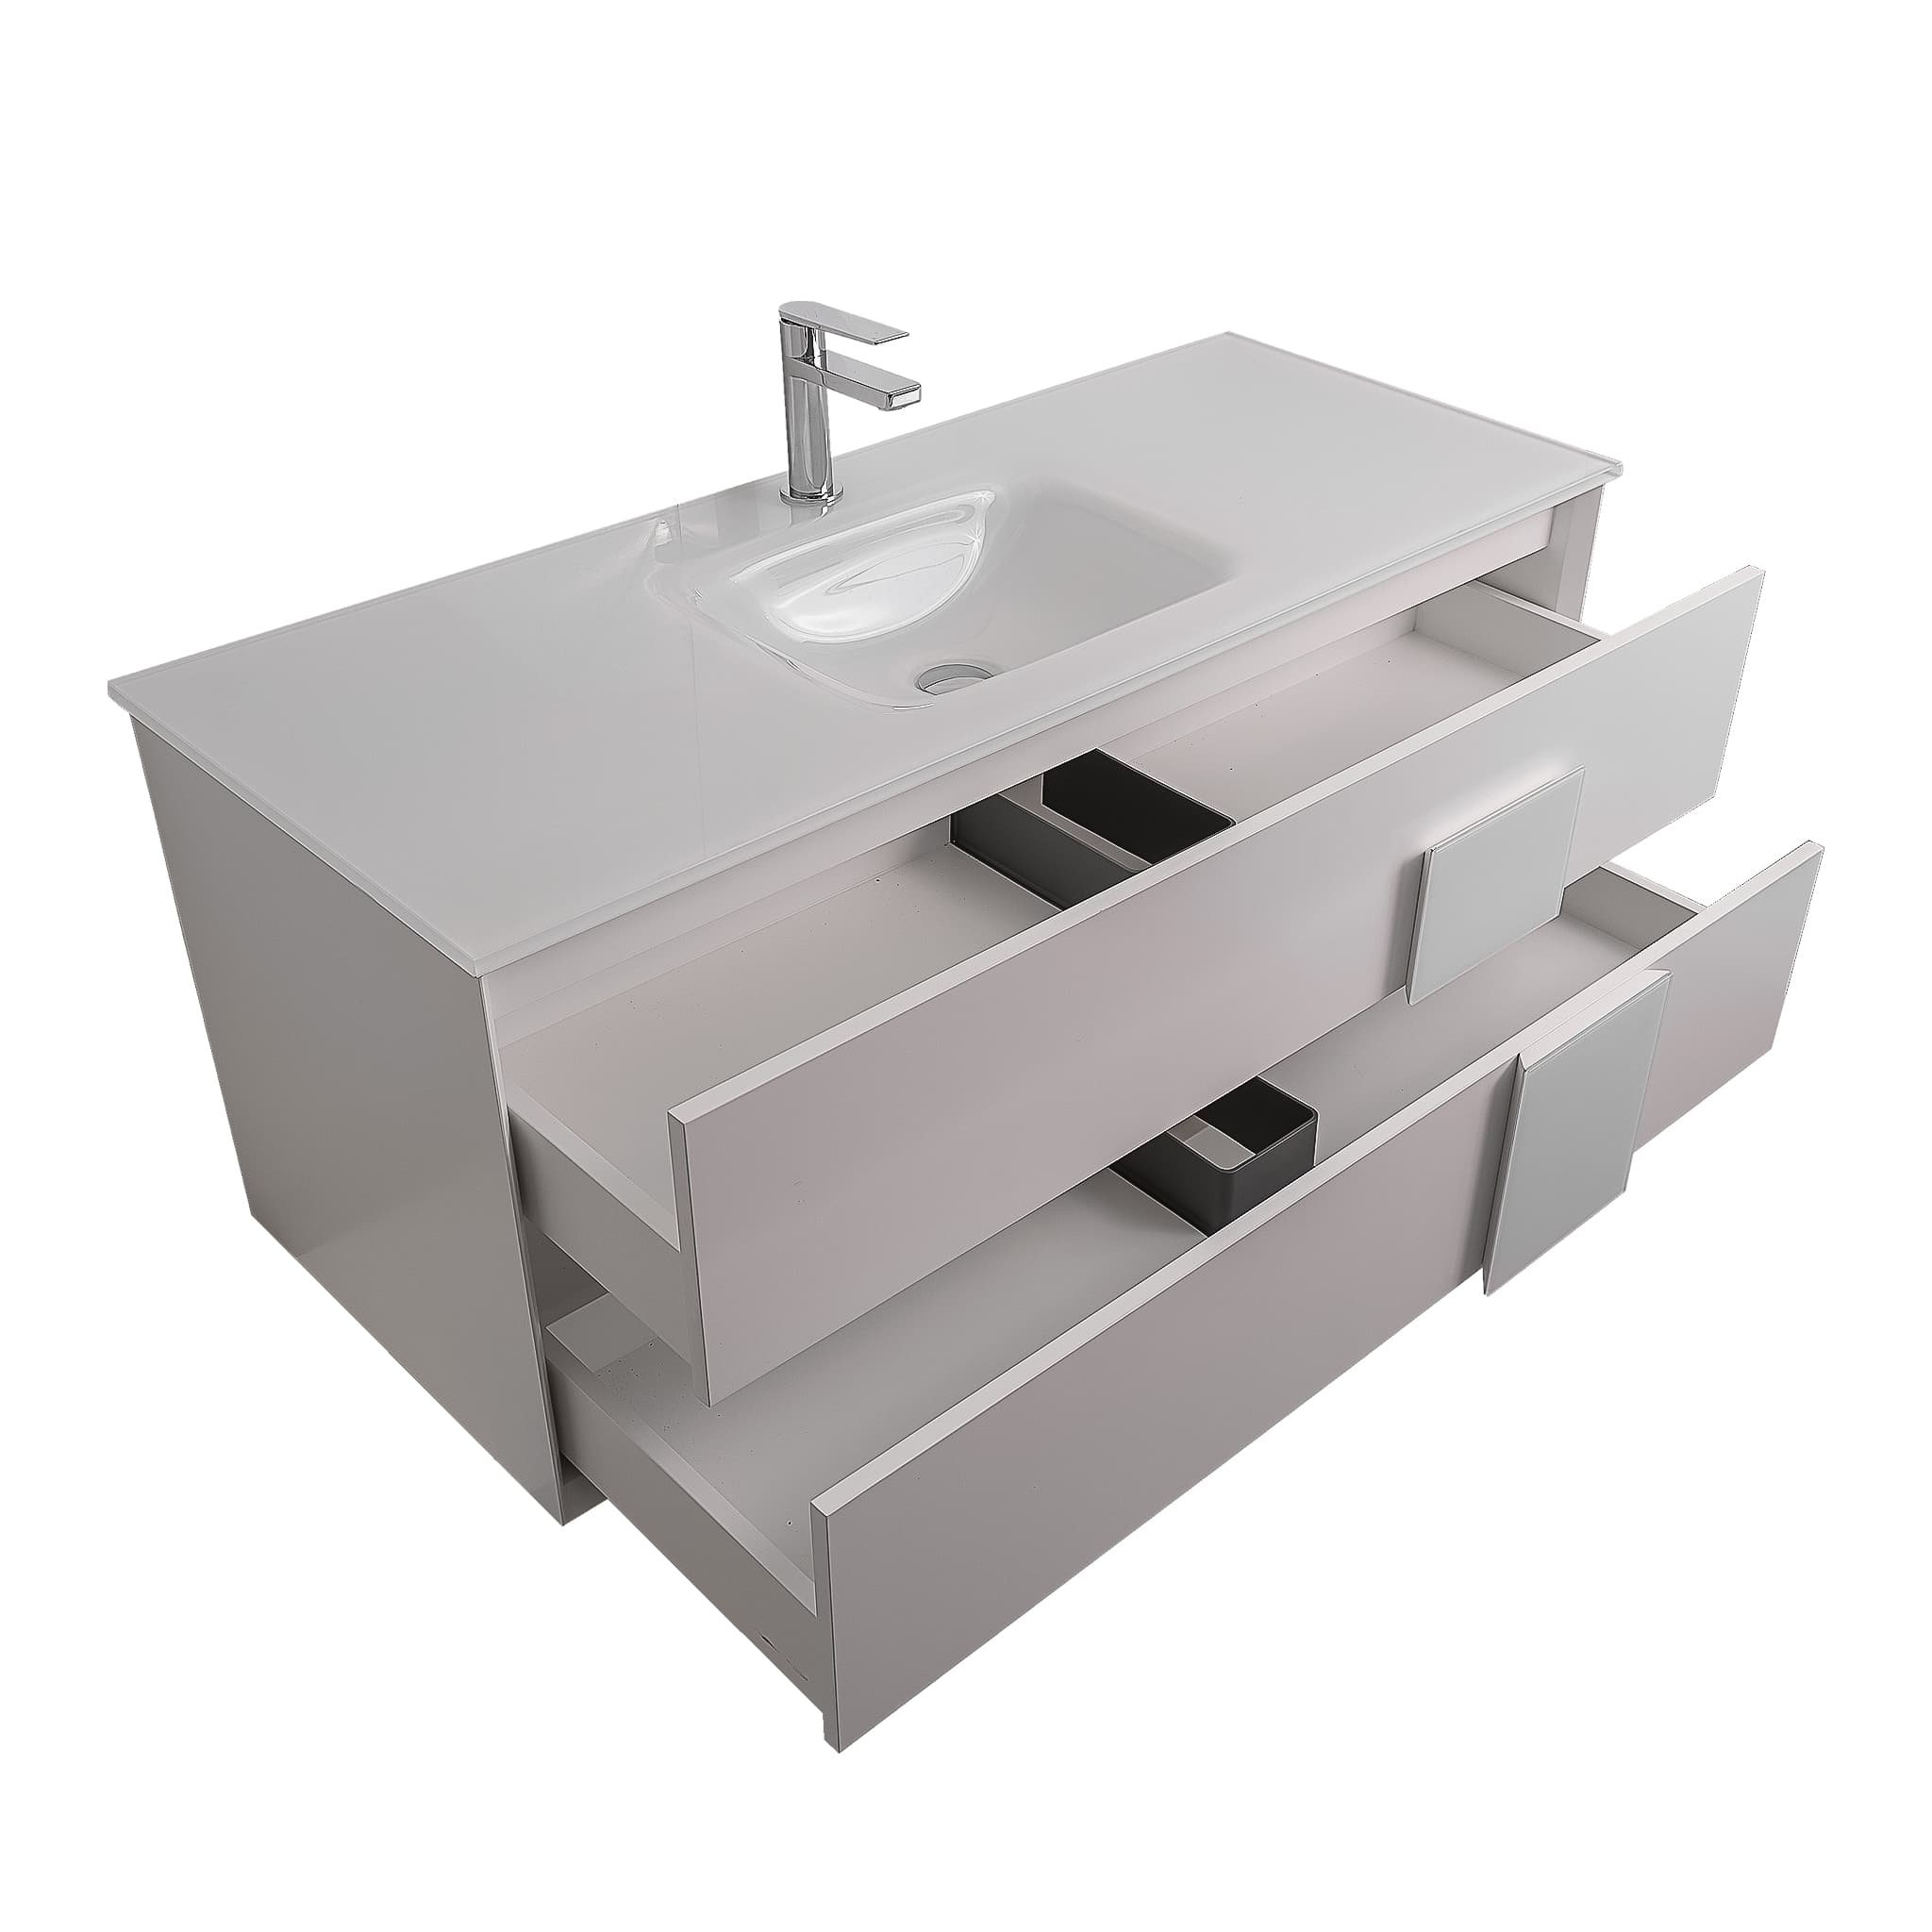 Piazza 47.5 Matte White With White Handle Cabinet, White Tempered Glass Sink, Wall Mounted Modern Vanity Set